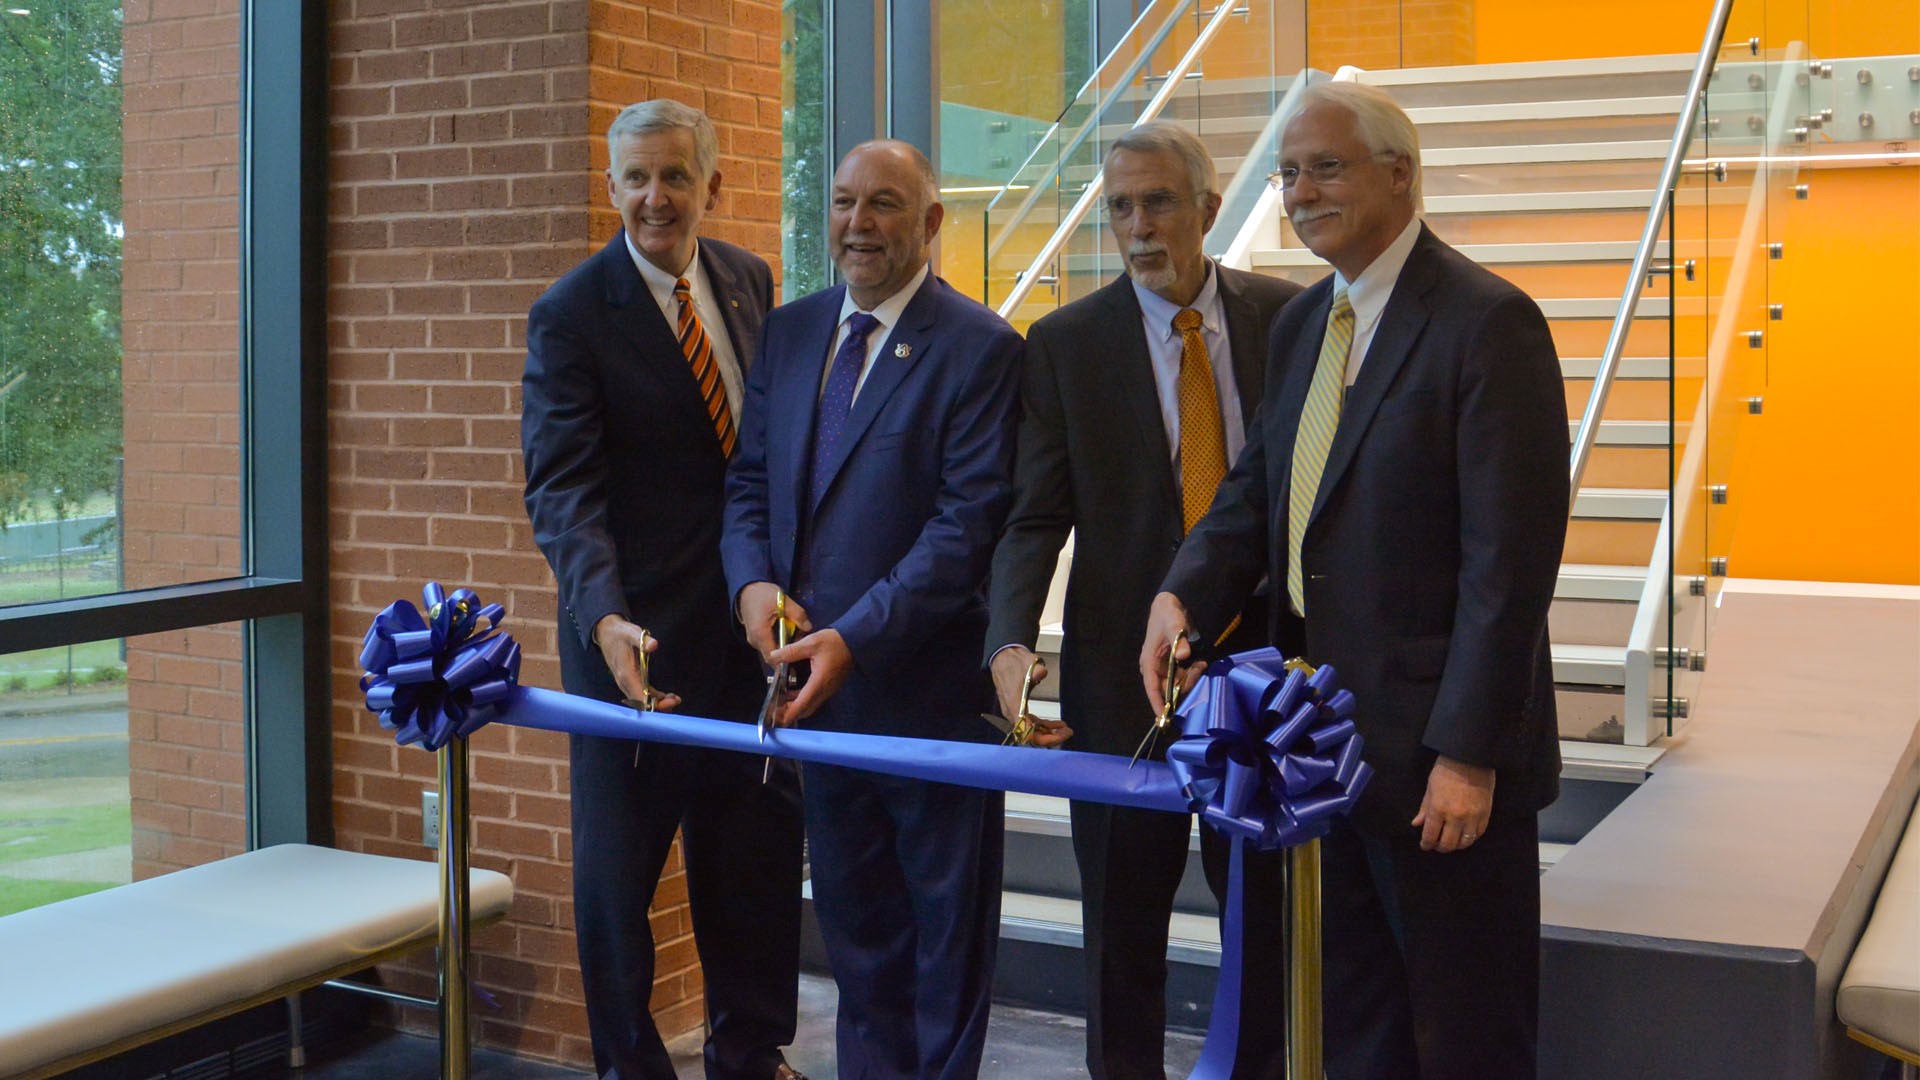 Leach Science Center Ribbon Cutting Ceremony